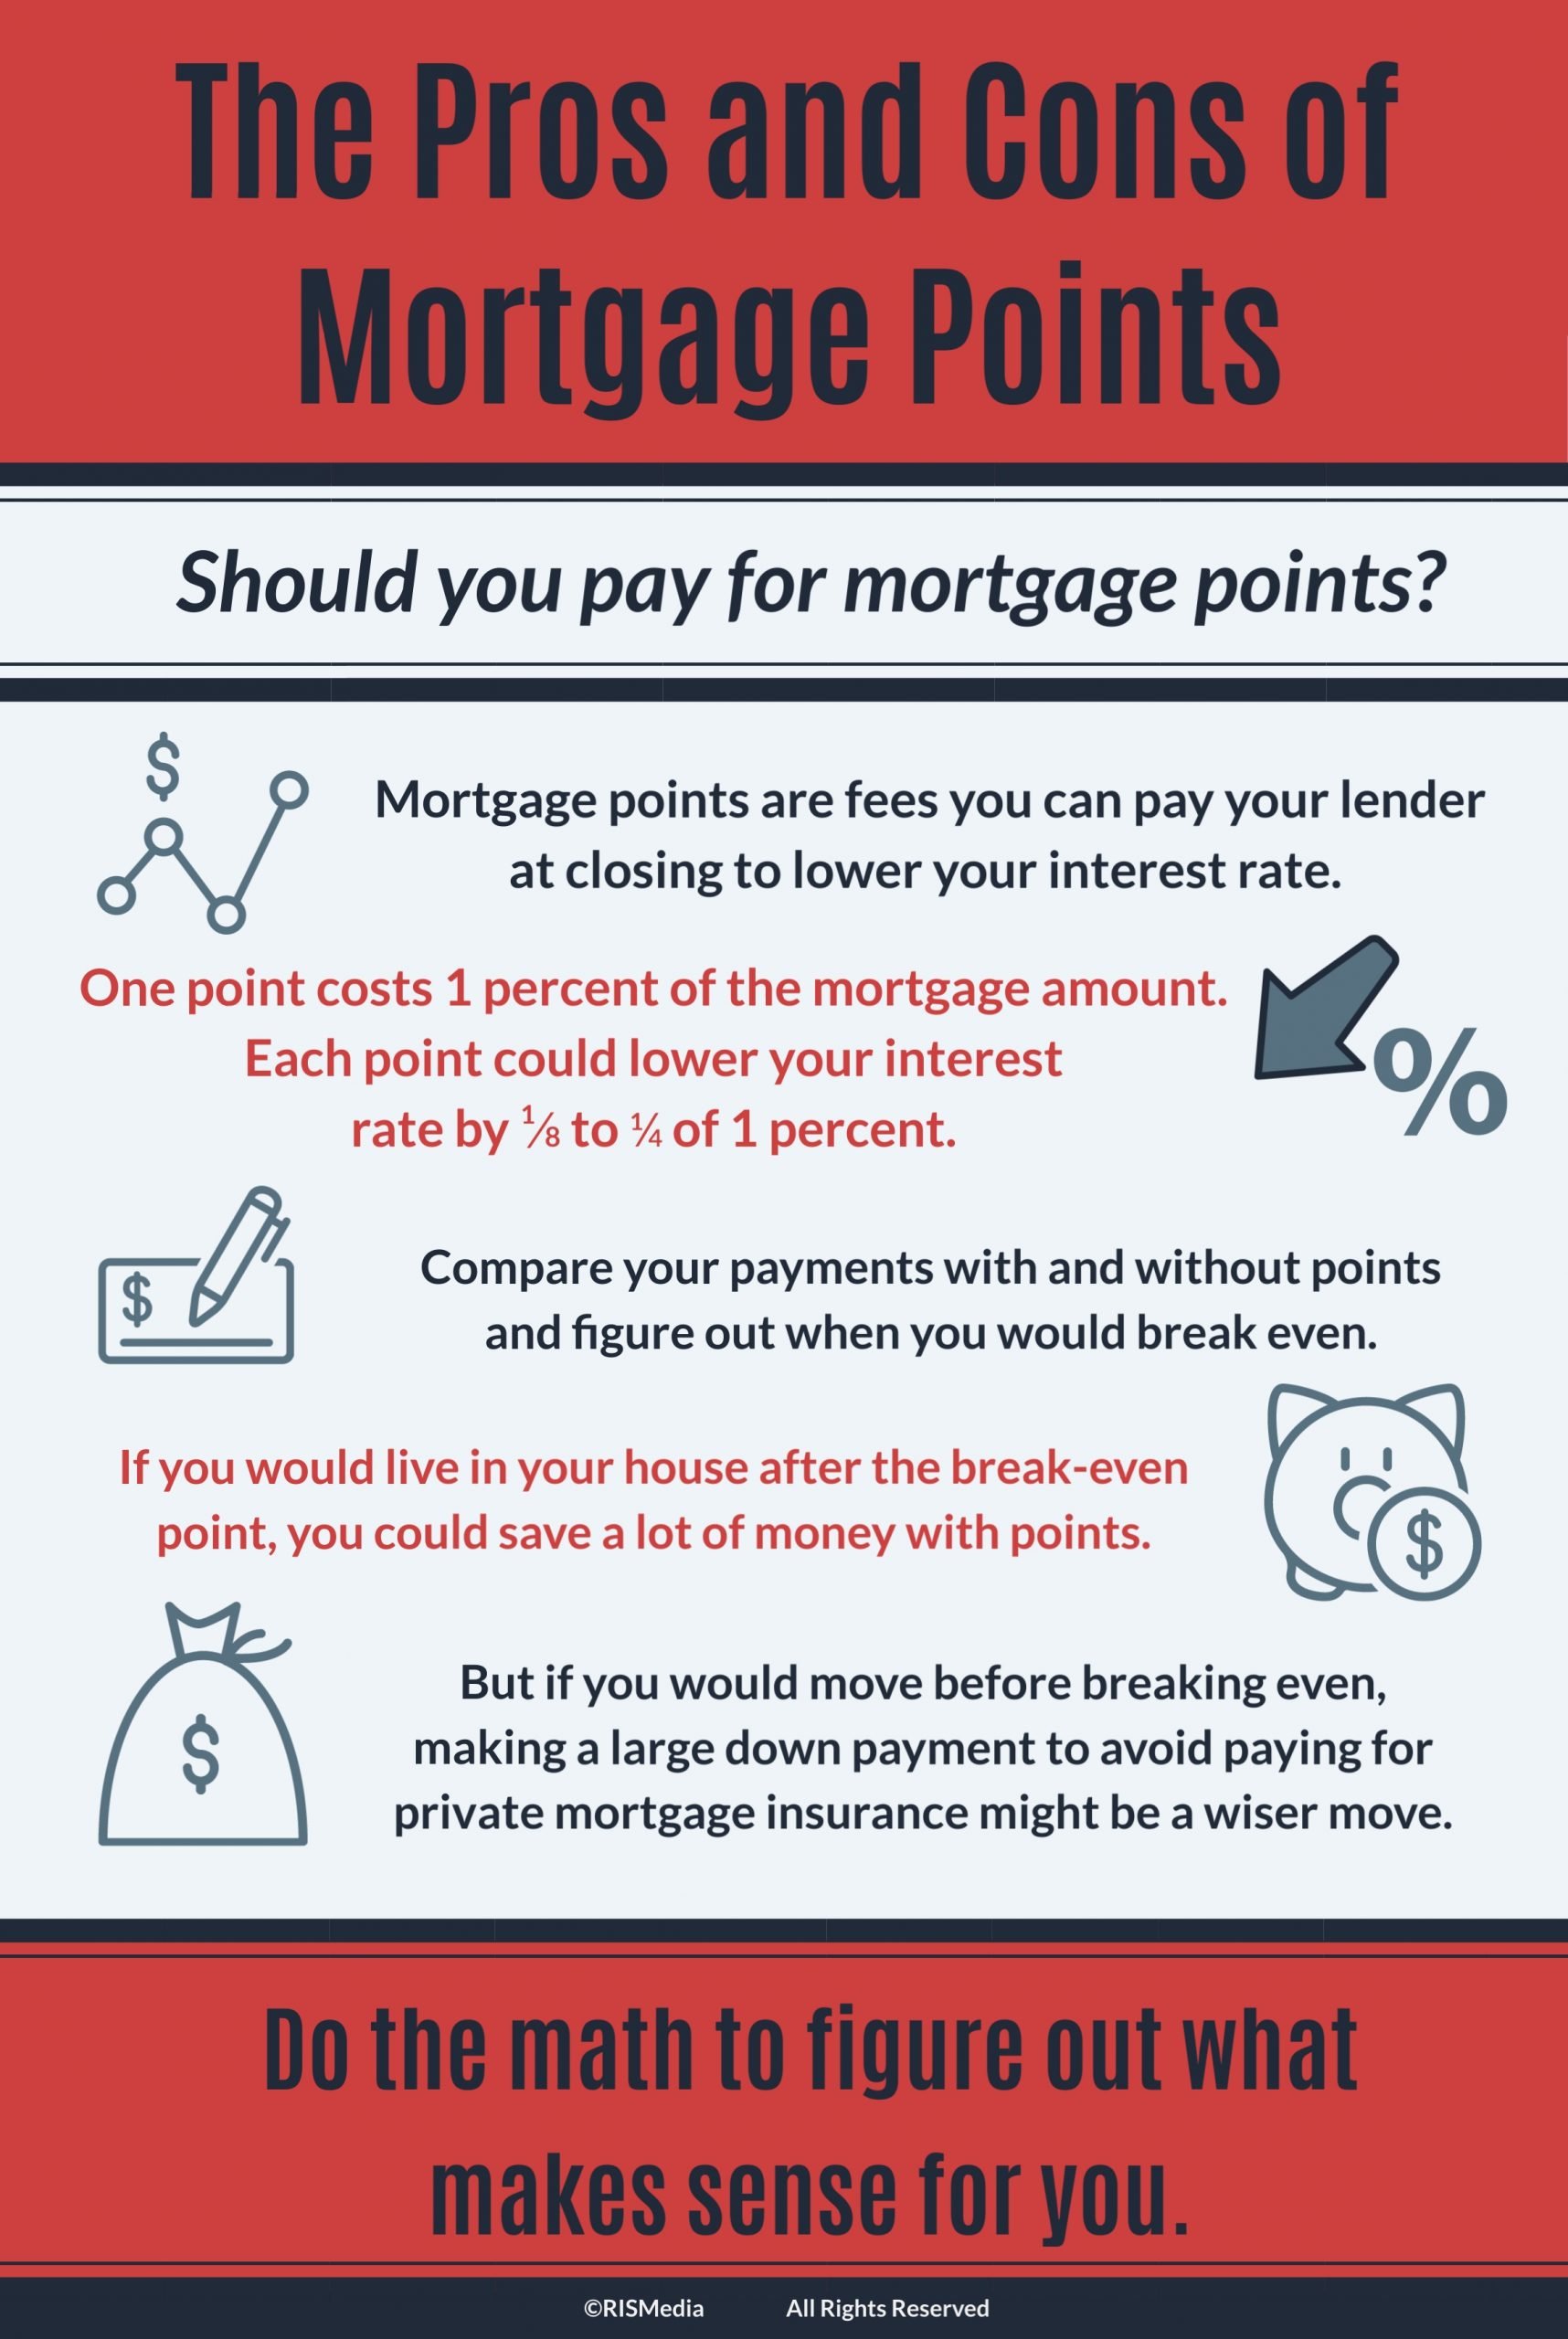 The Pros and Cons of Mortgage Points â RISMedia